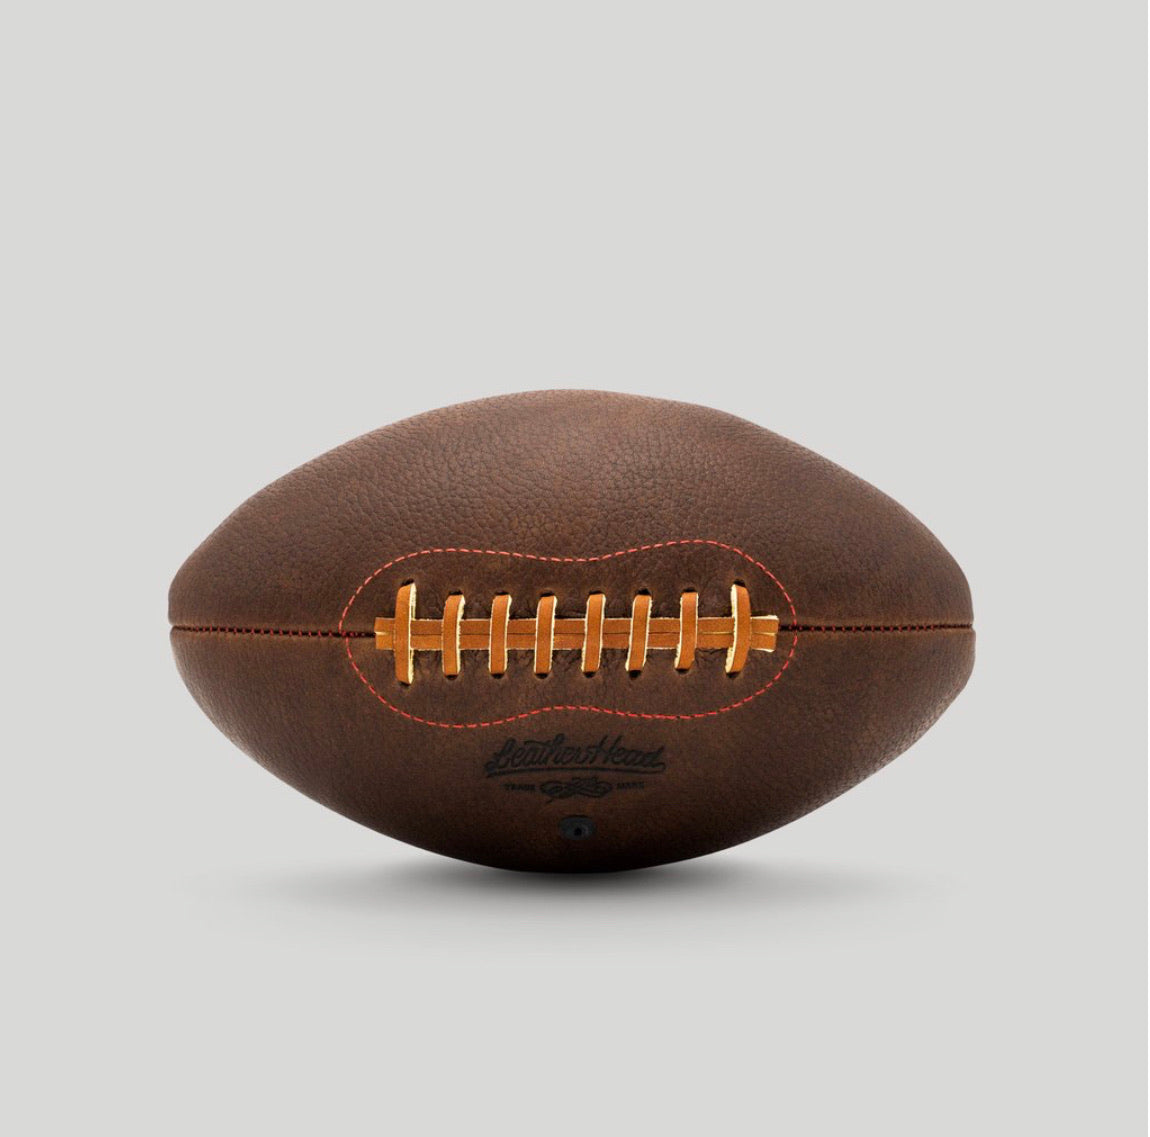 Handsome Dan Football by Leather Head Sports